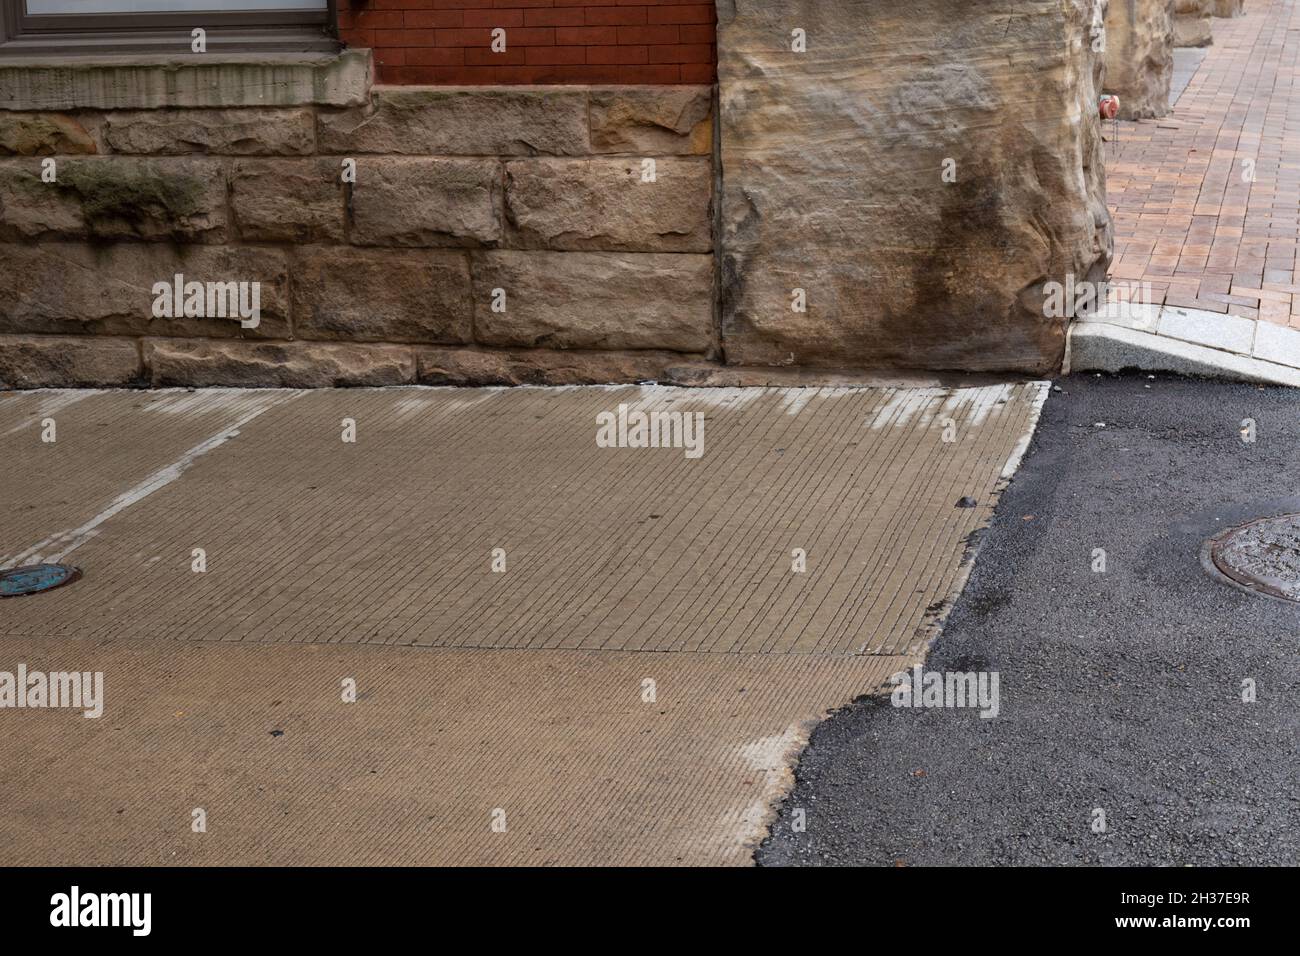 Corner of a red brick and rusticated stone building meeting a brick sidewalk, concrete driveway, and asphalt road surface, horizontal aspect Stock Photo